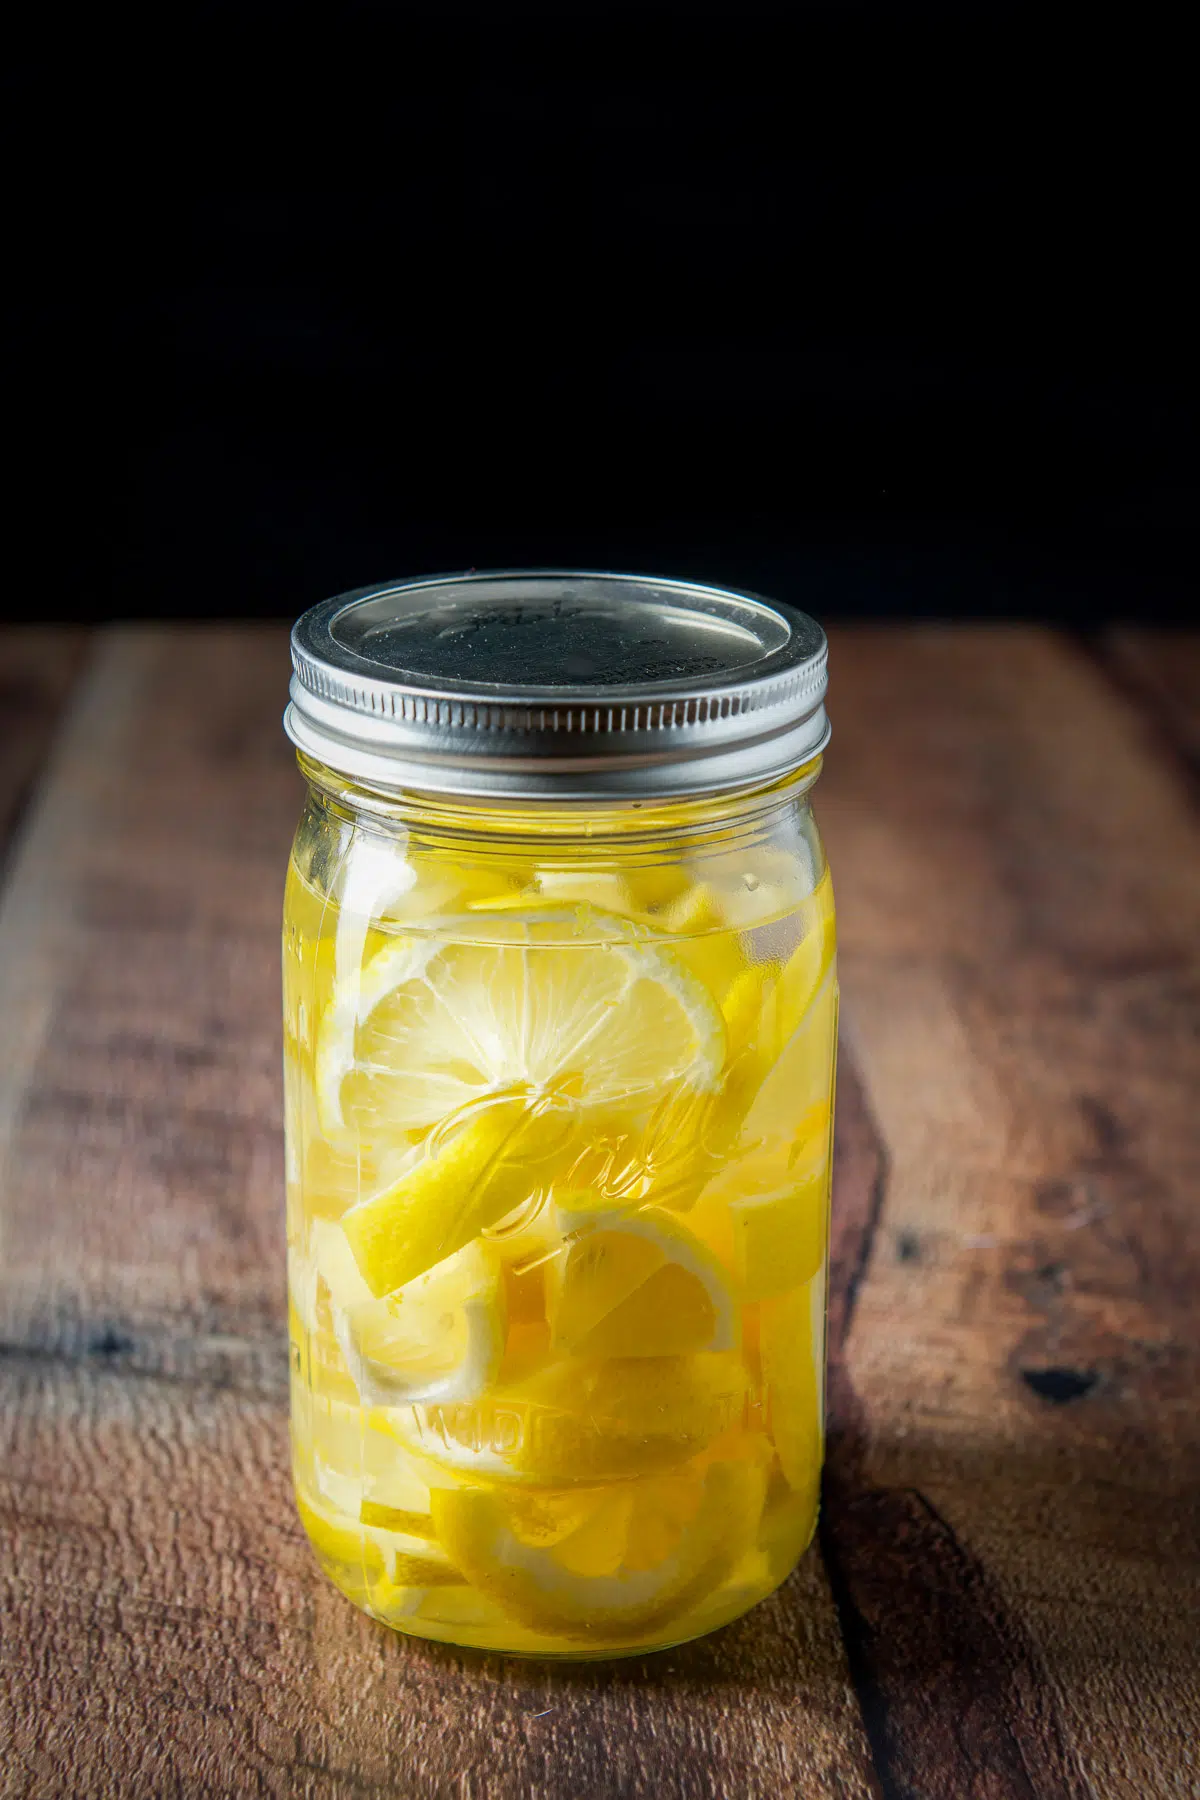 The vodka in a sealed jar with the lemon slices